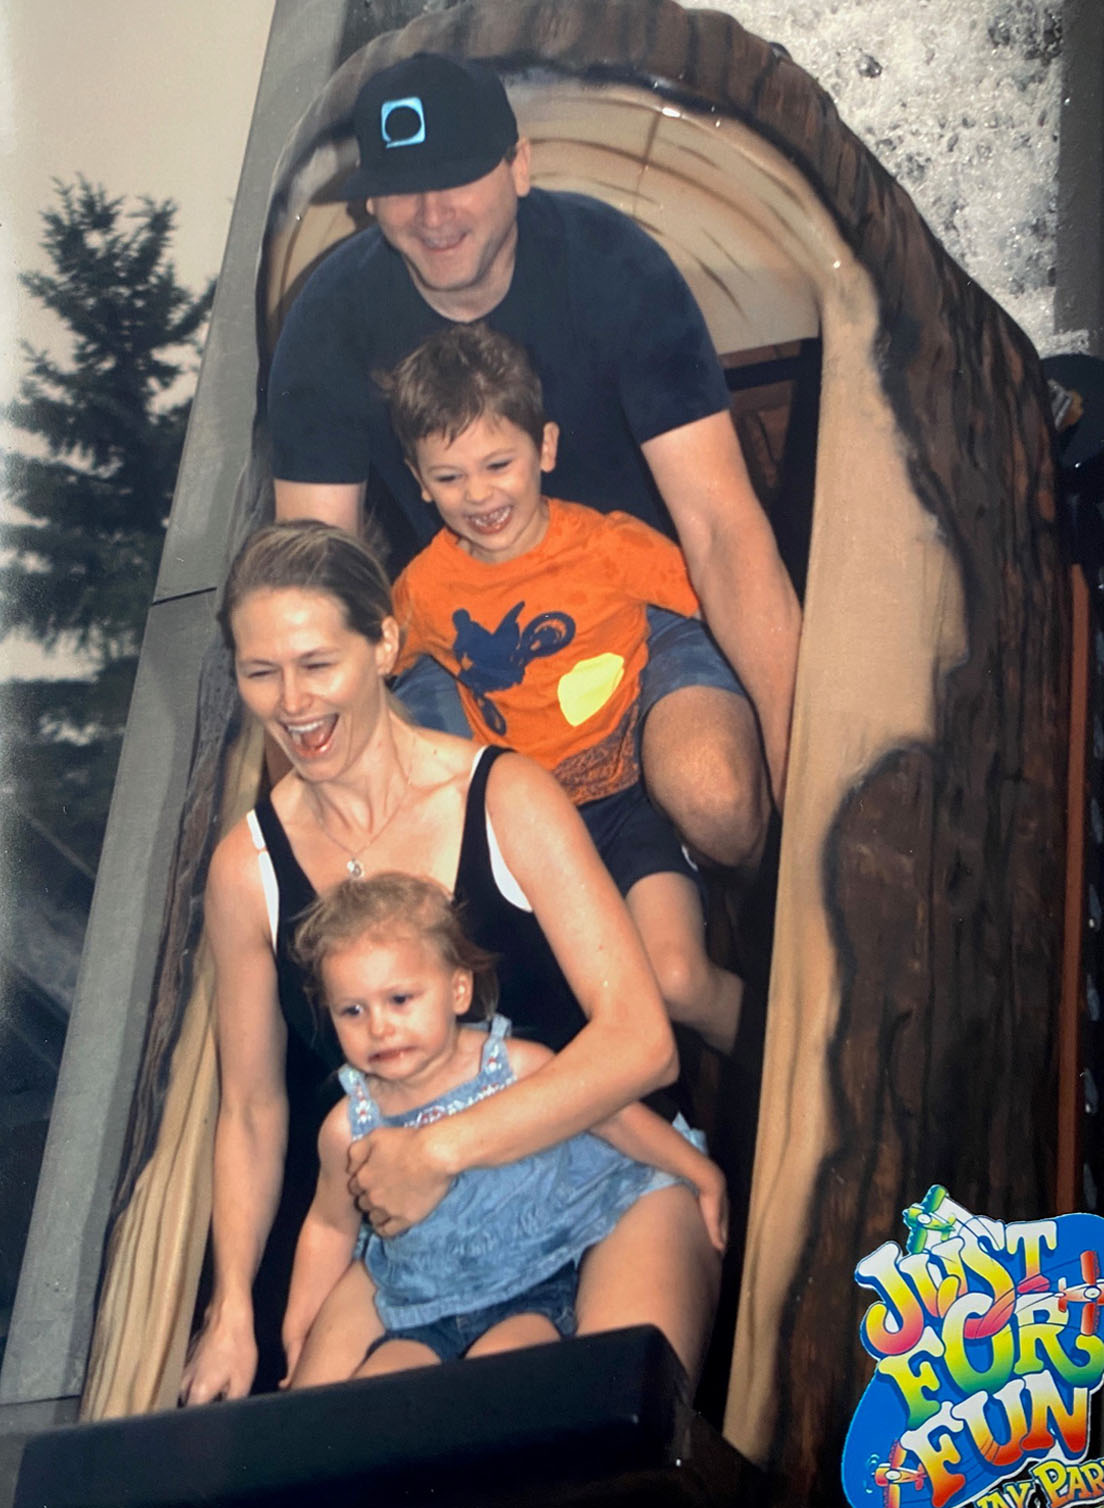 Chandra with her family riding the log flume at an amusement park